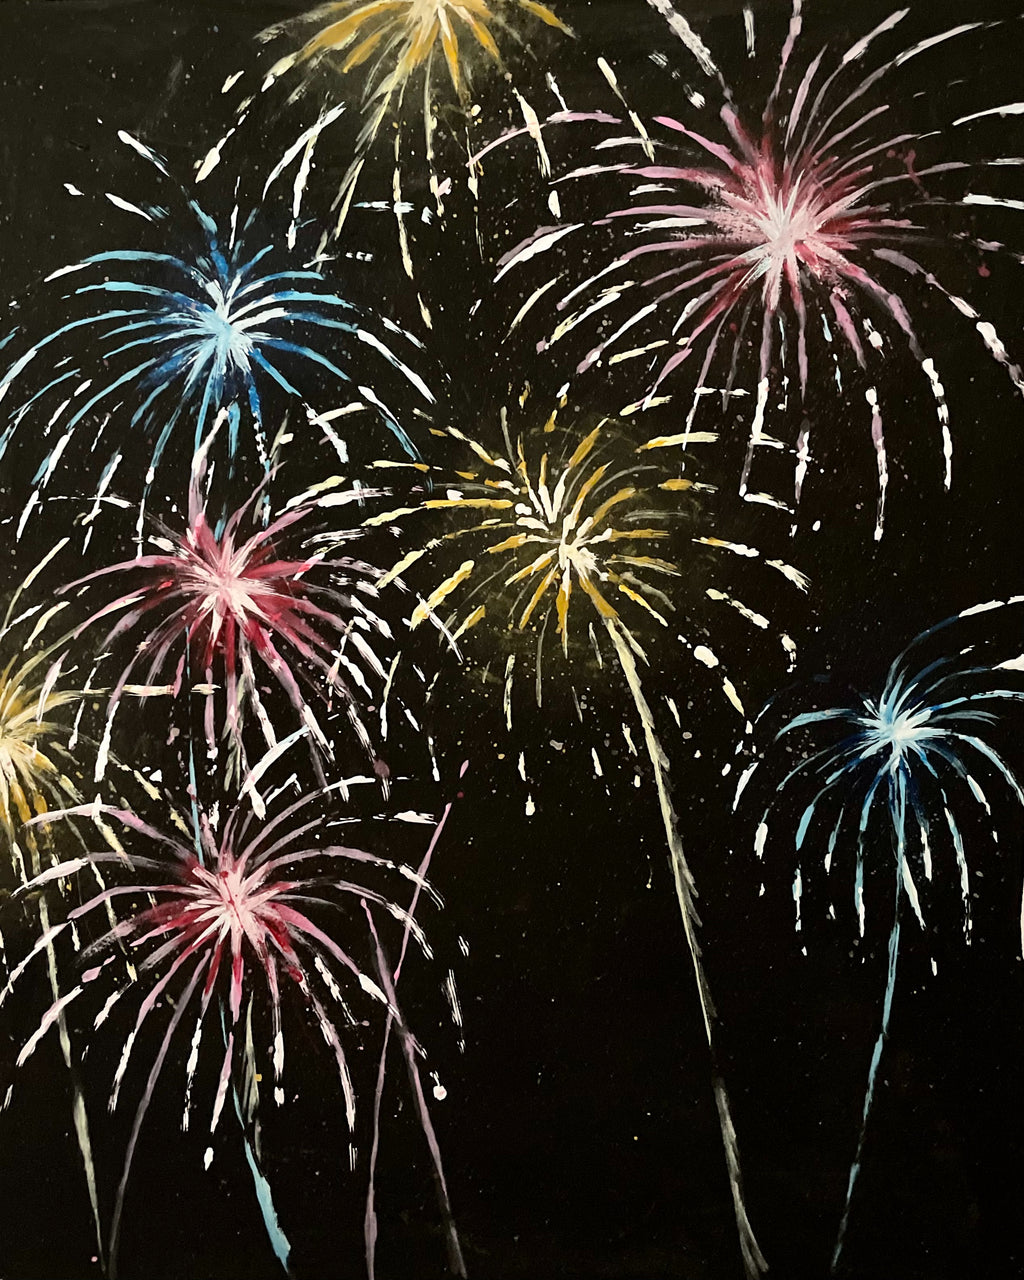 Fireworks painted onto a black background. Sparks break off from the brightly colored centers in blue, pink-red, and yellow bursts.